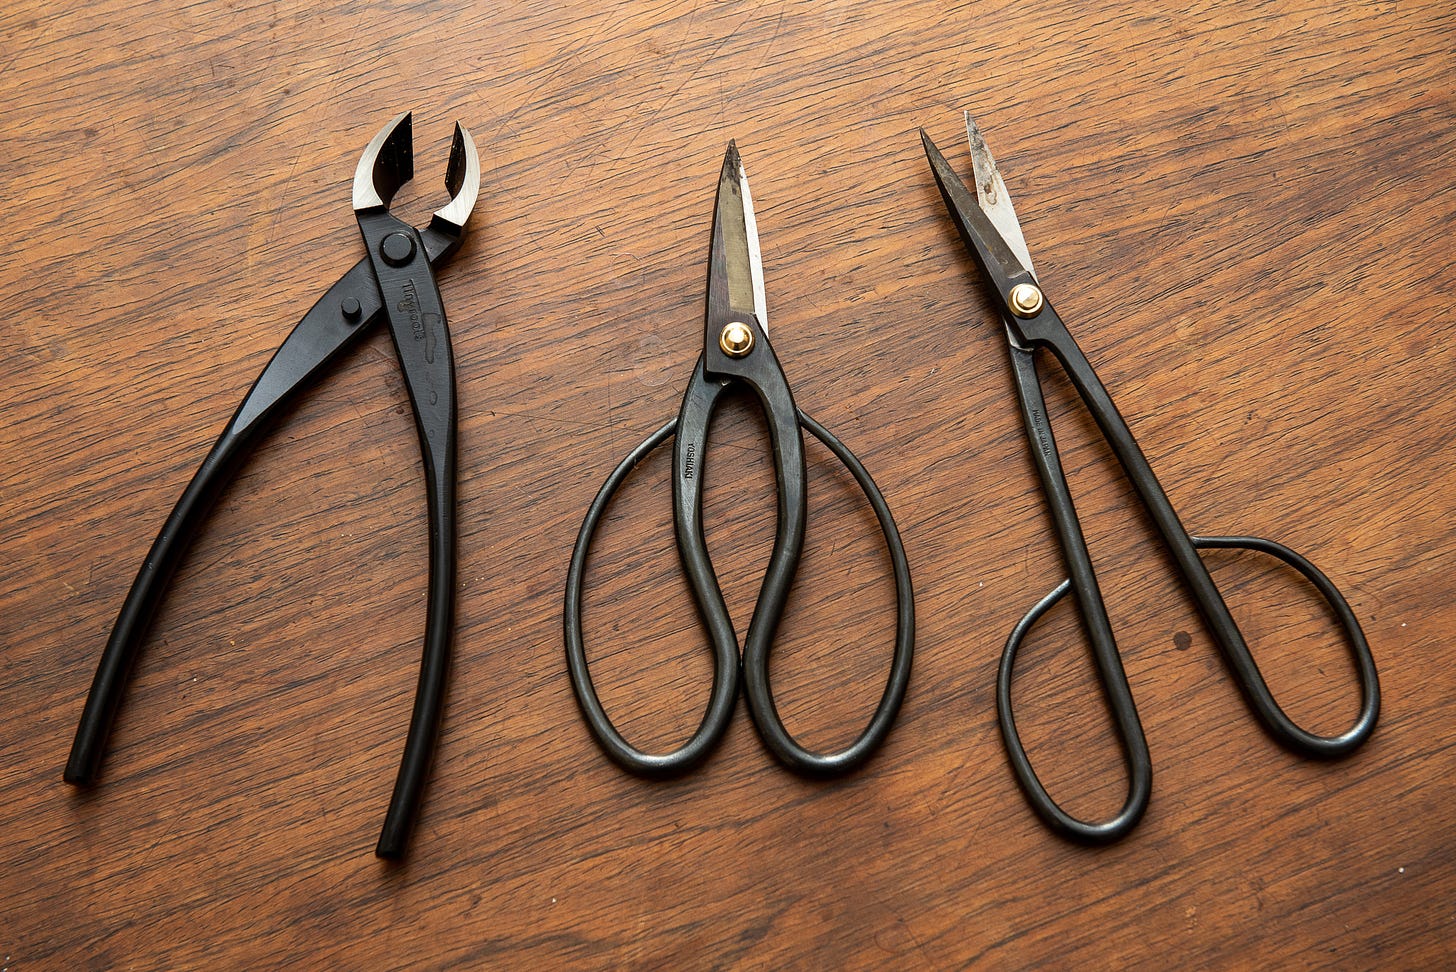 ID: Three black coated metal bonsai trimmers on a table. Two look like scissors, the third is a plier device called a concave cutter